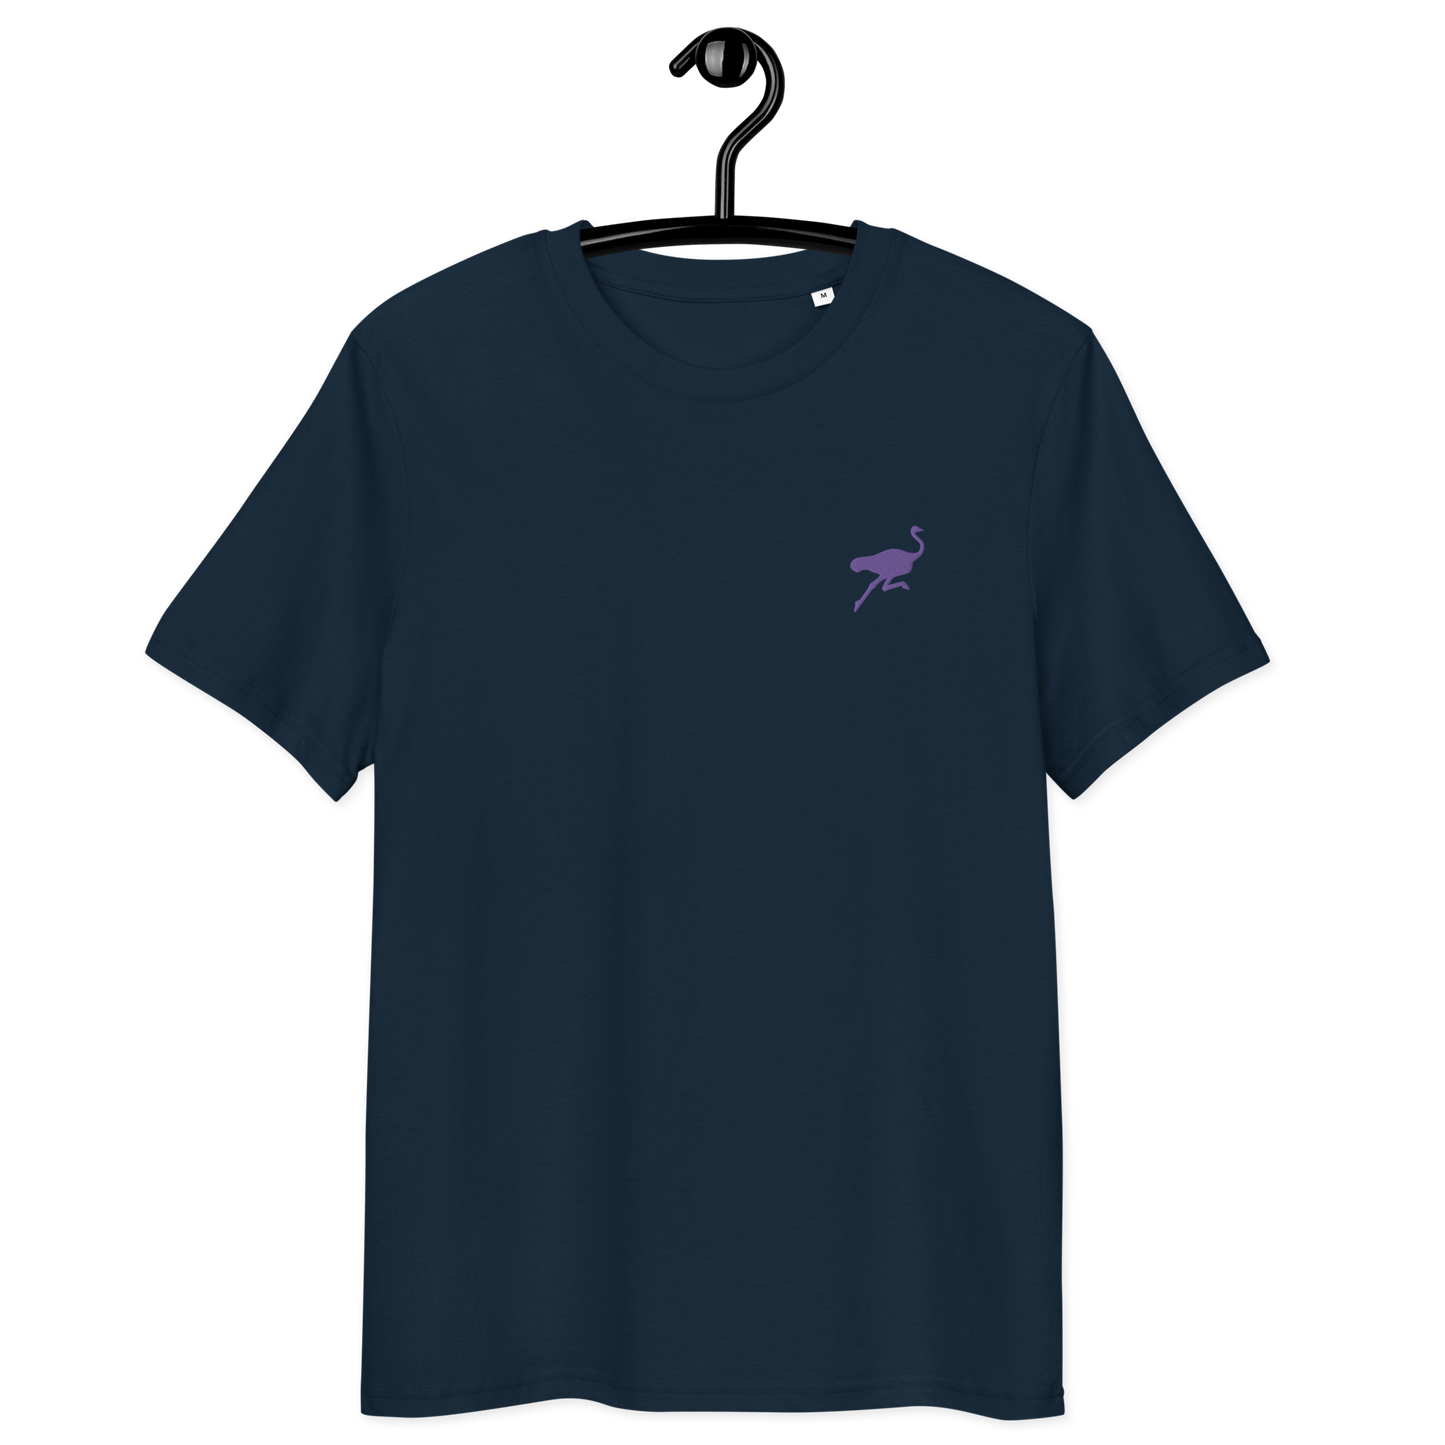 Front view of a navy colored embroidered nostr t-shirt.